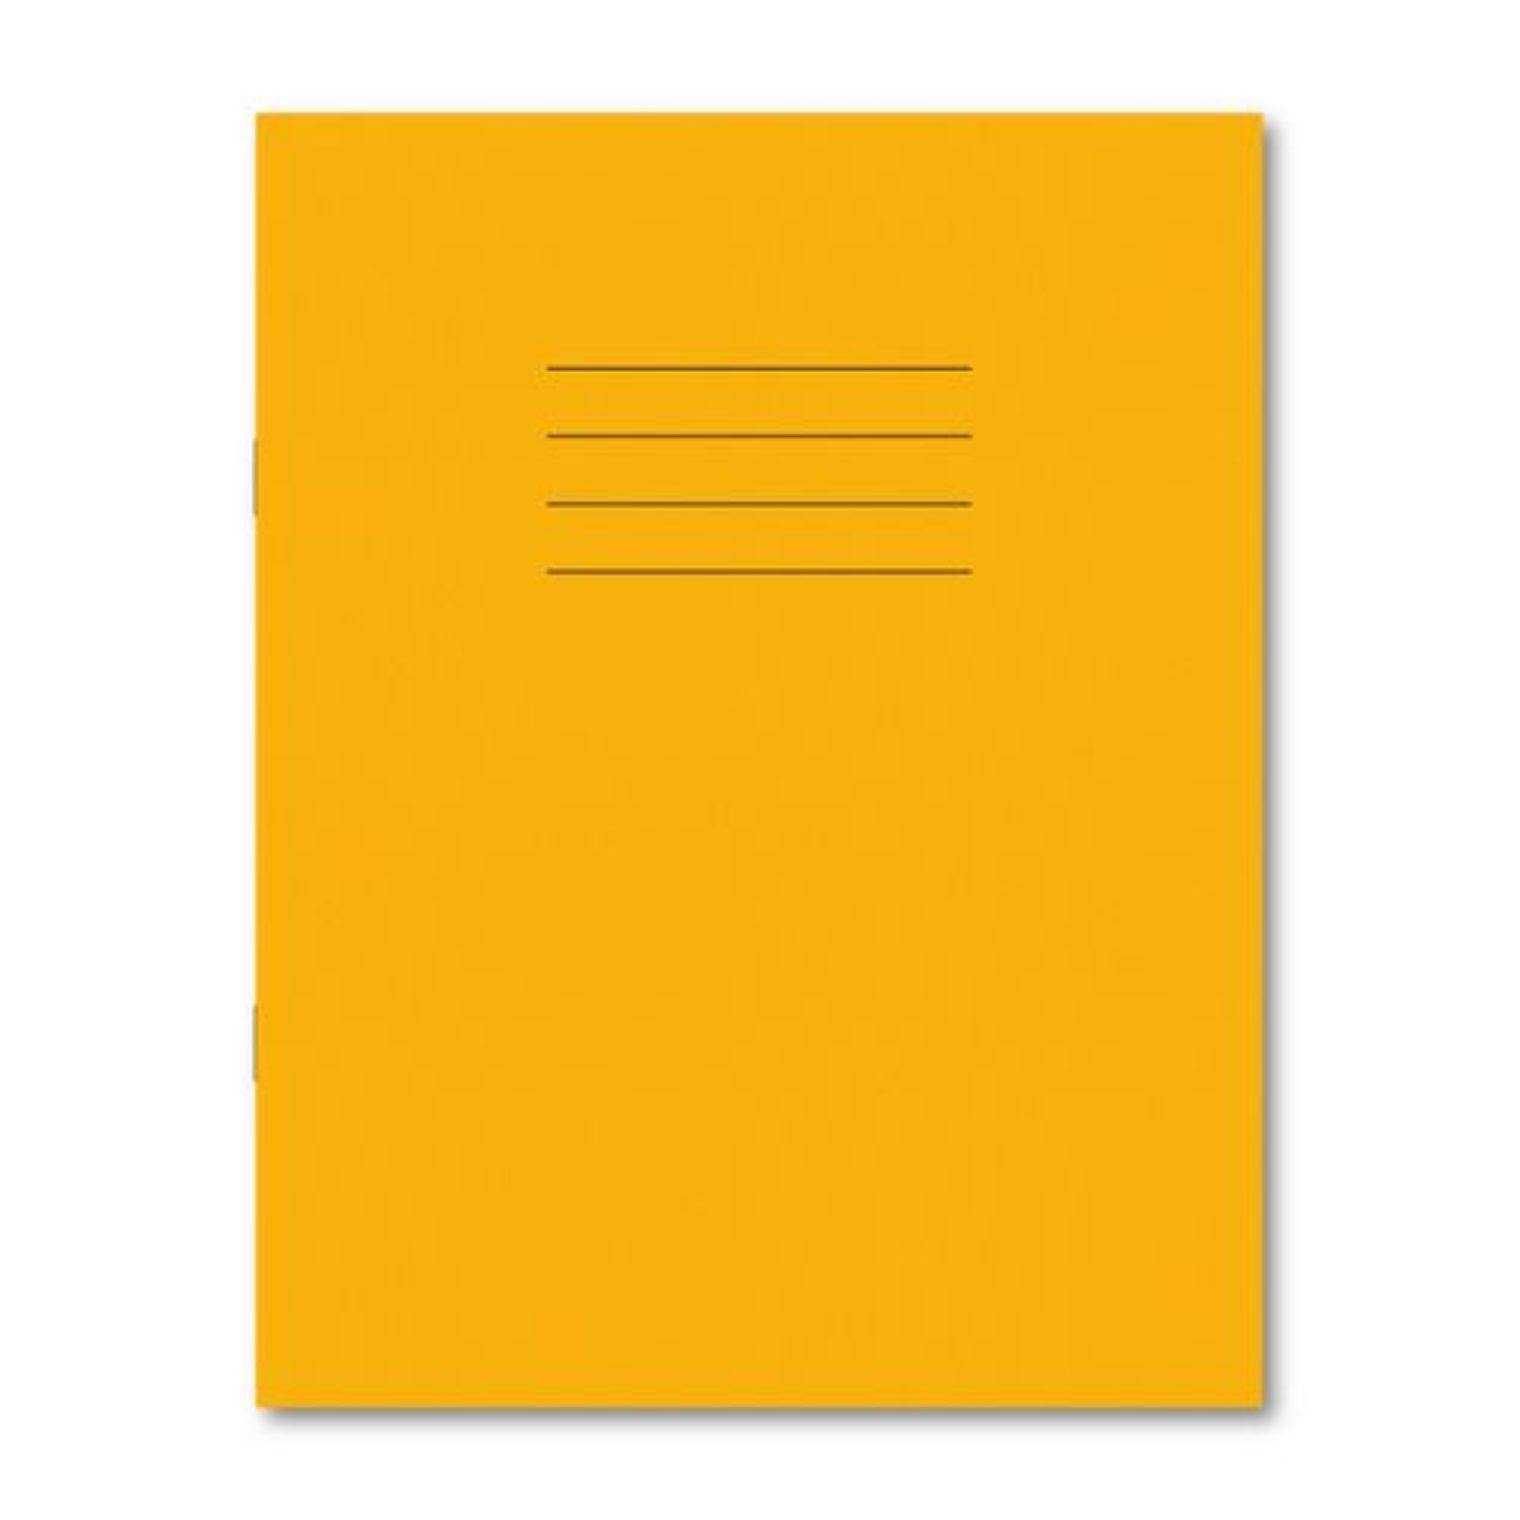 Exercise Book A4 Yellow Cover